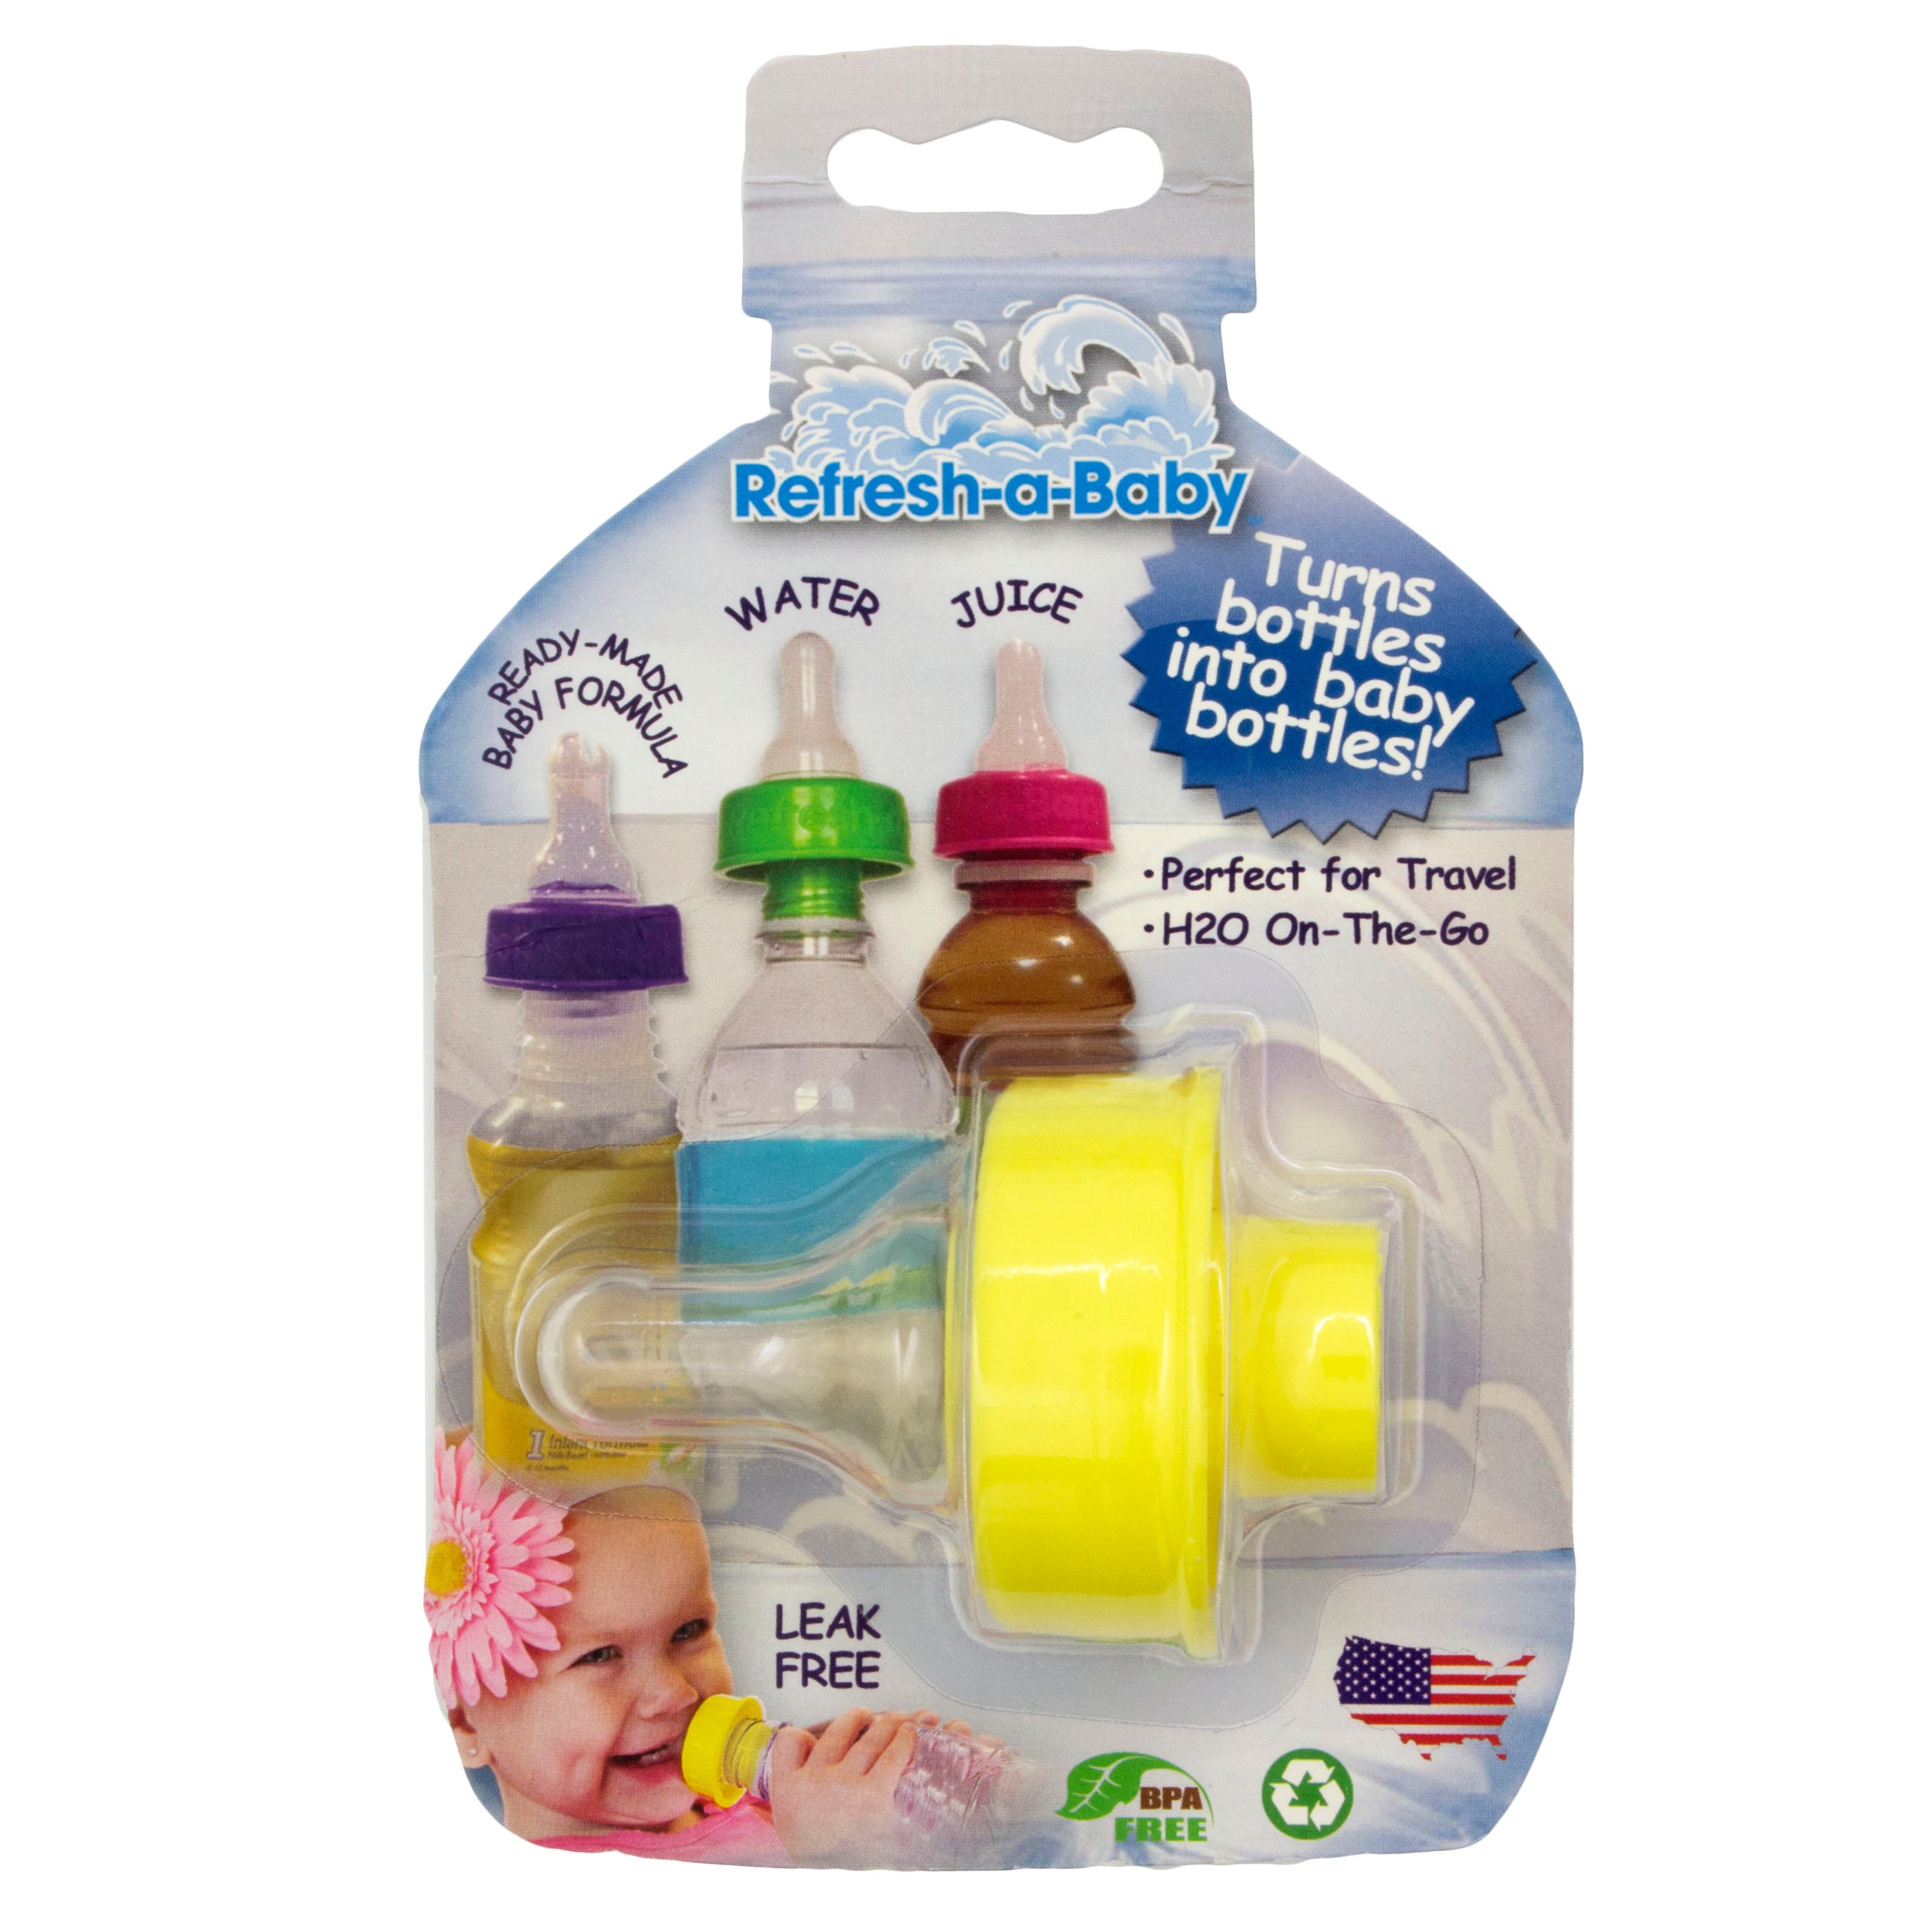 Baby Bottle Adapter Turns Water Bottles into Baby Bottles, Formula or  Bottled Water for Babies On-The-Go by Refresh-A-Baby (2-Pack, Llama)